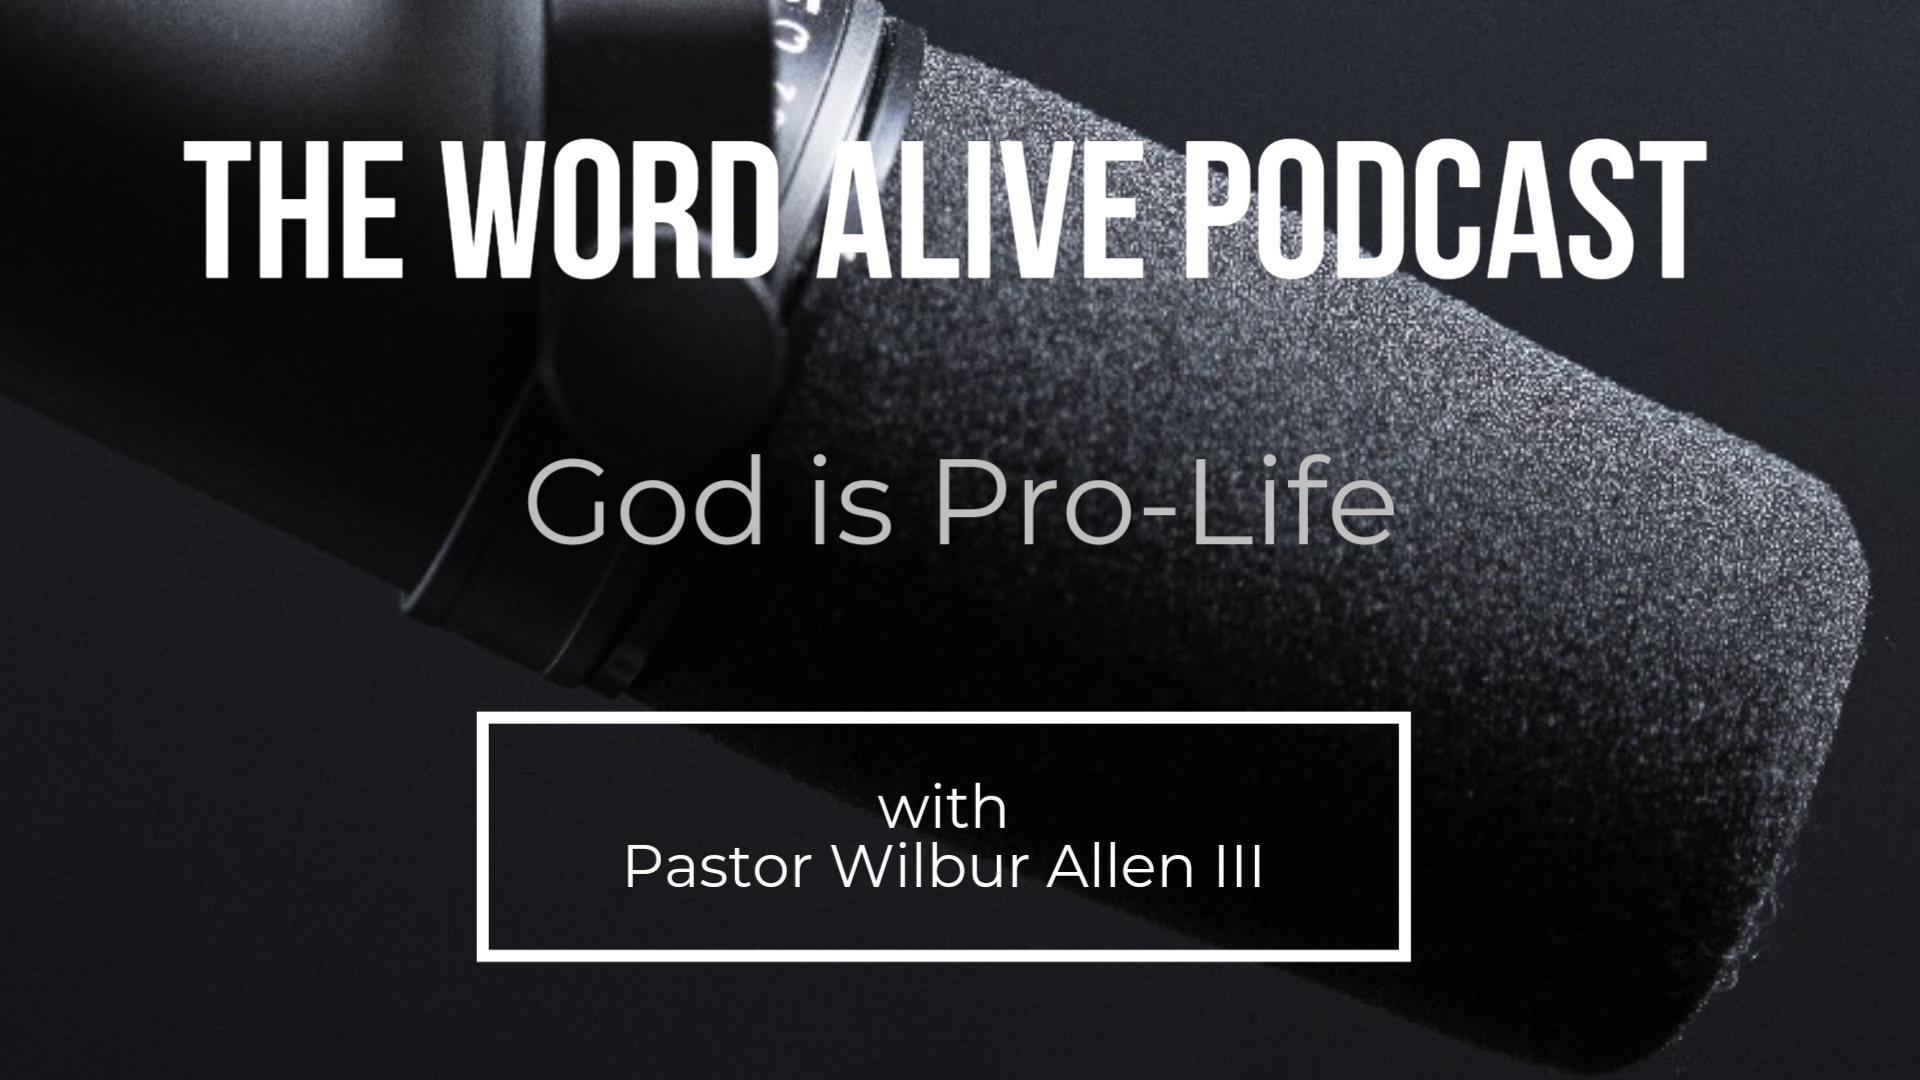 Word Alive Podcast - God is Pro-Life